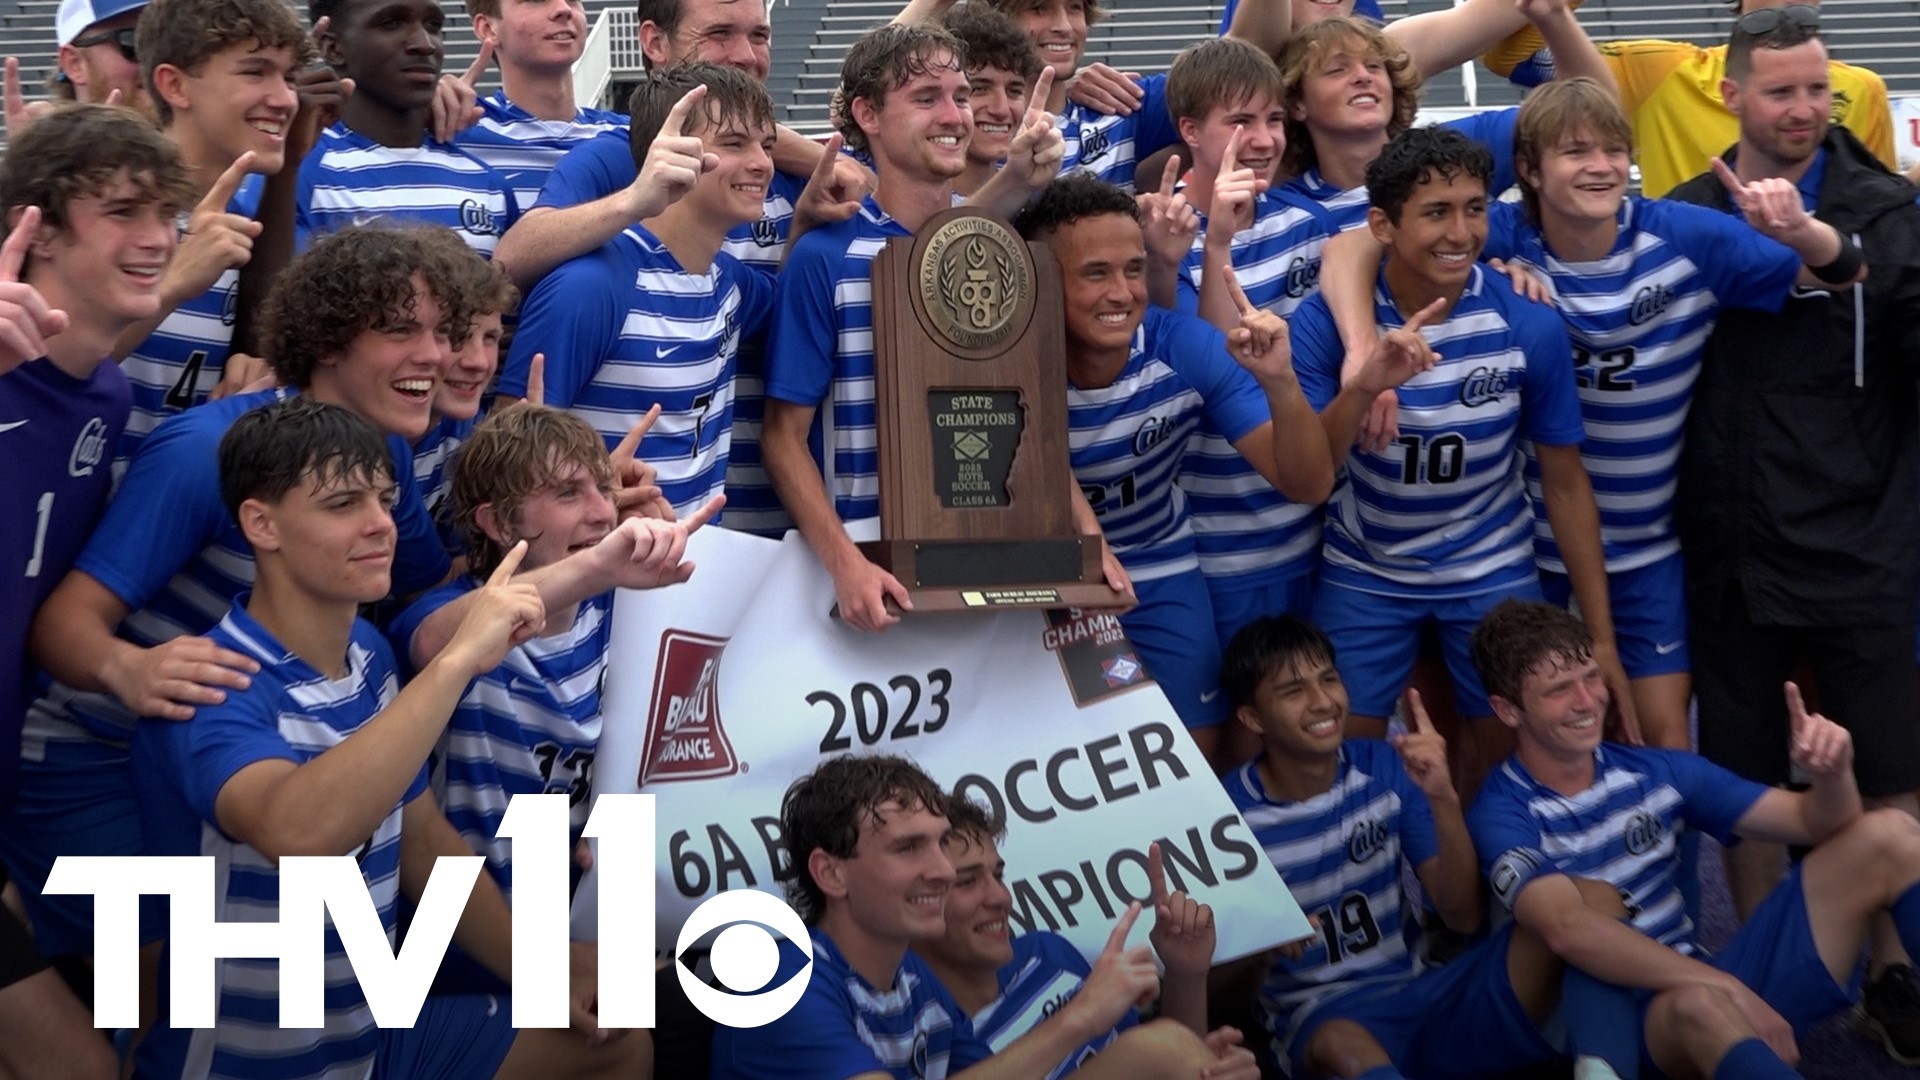 The Wampus Cats claimed their fourth state title in school history with a 3-2 victory over Springdale Friday at Estes Stadium in Conway.